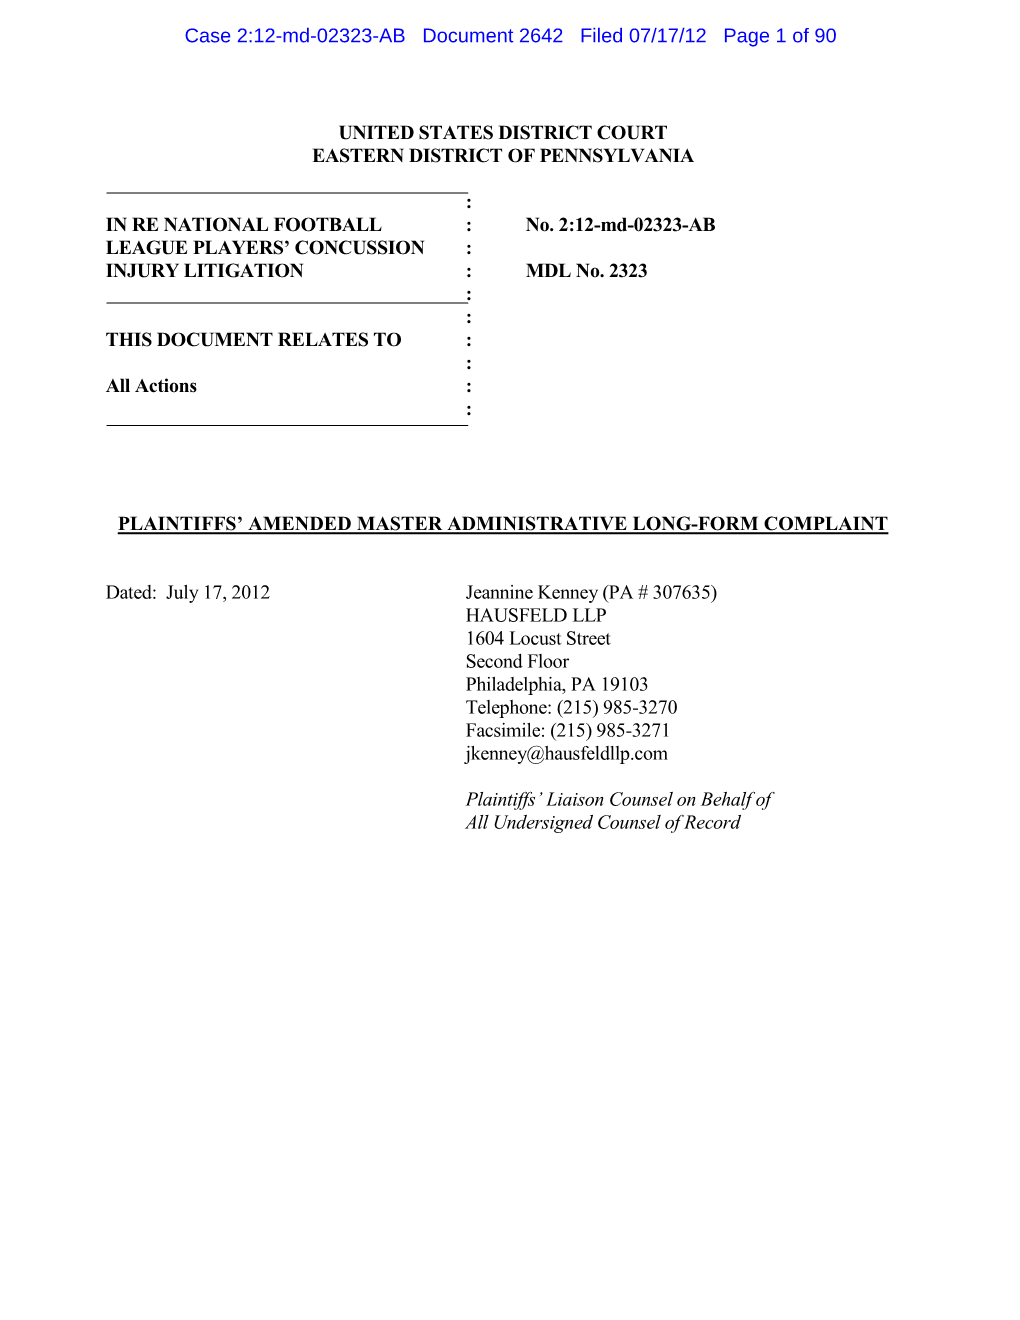 Case 2:12-Md-02323-AB Document 2642 Filed 07/17/12 Page 1 of 90